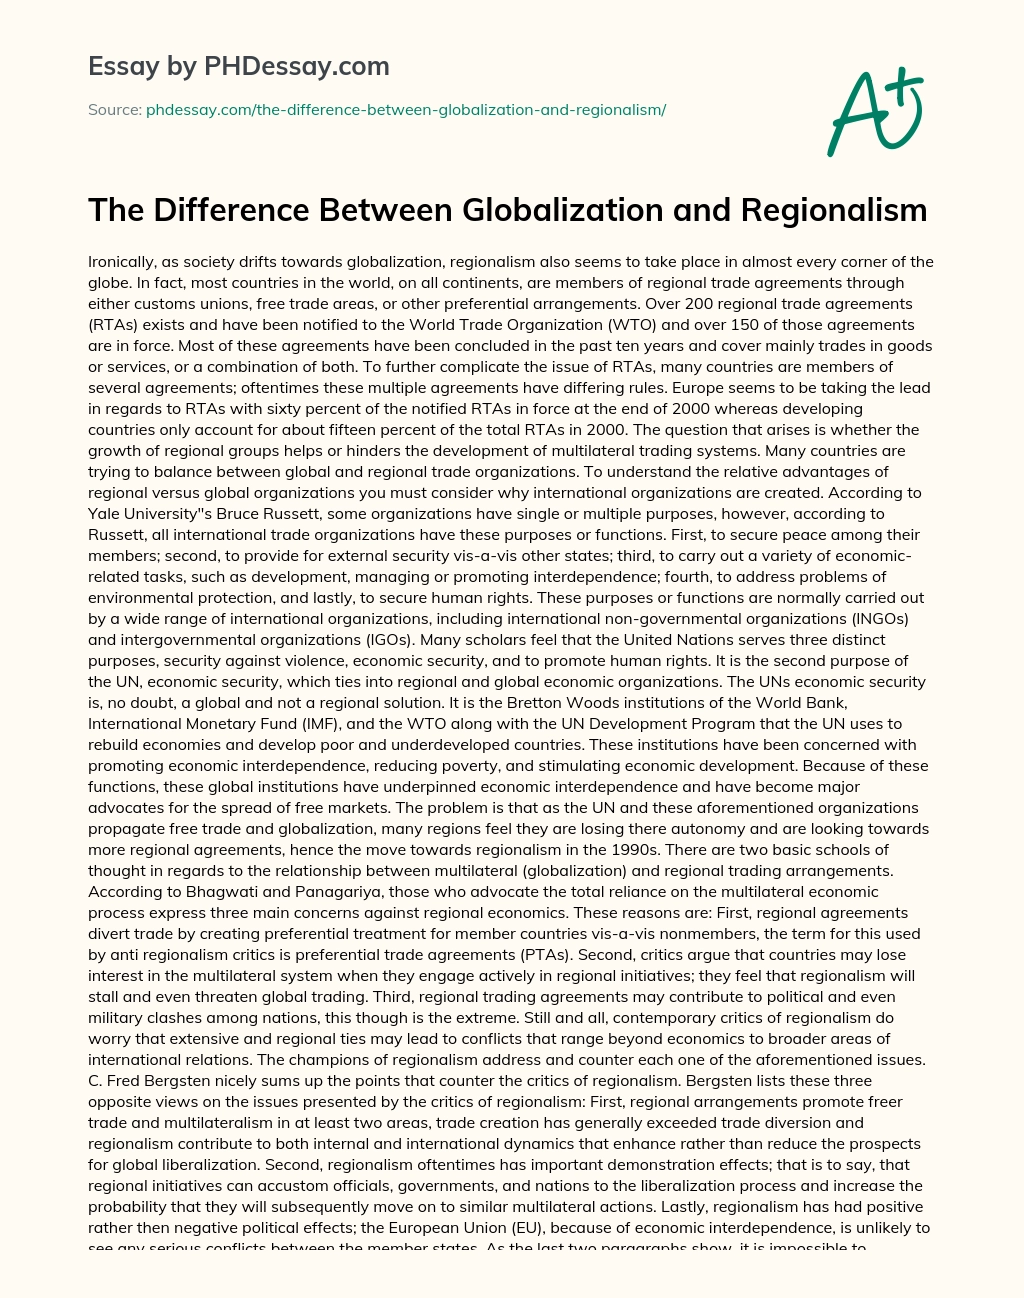 The Difference Between Globalization and Regionalism essay